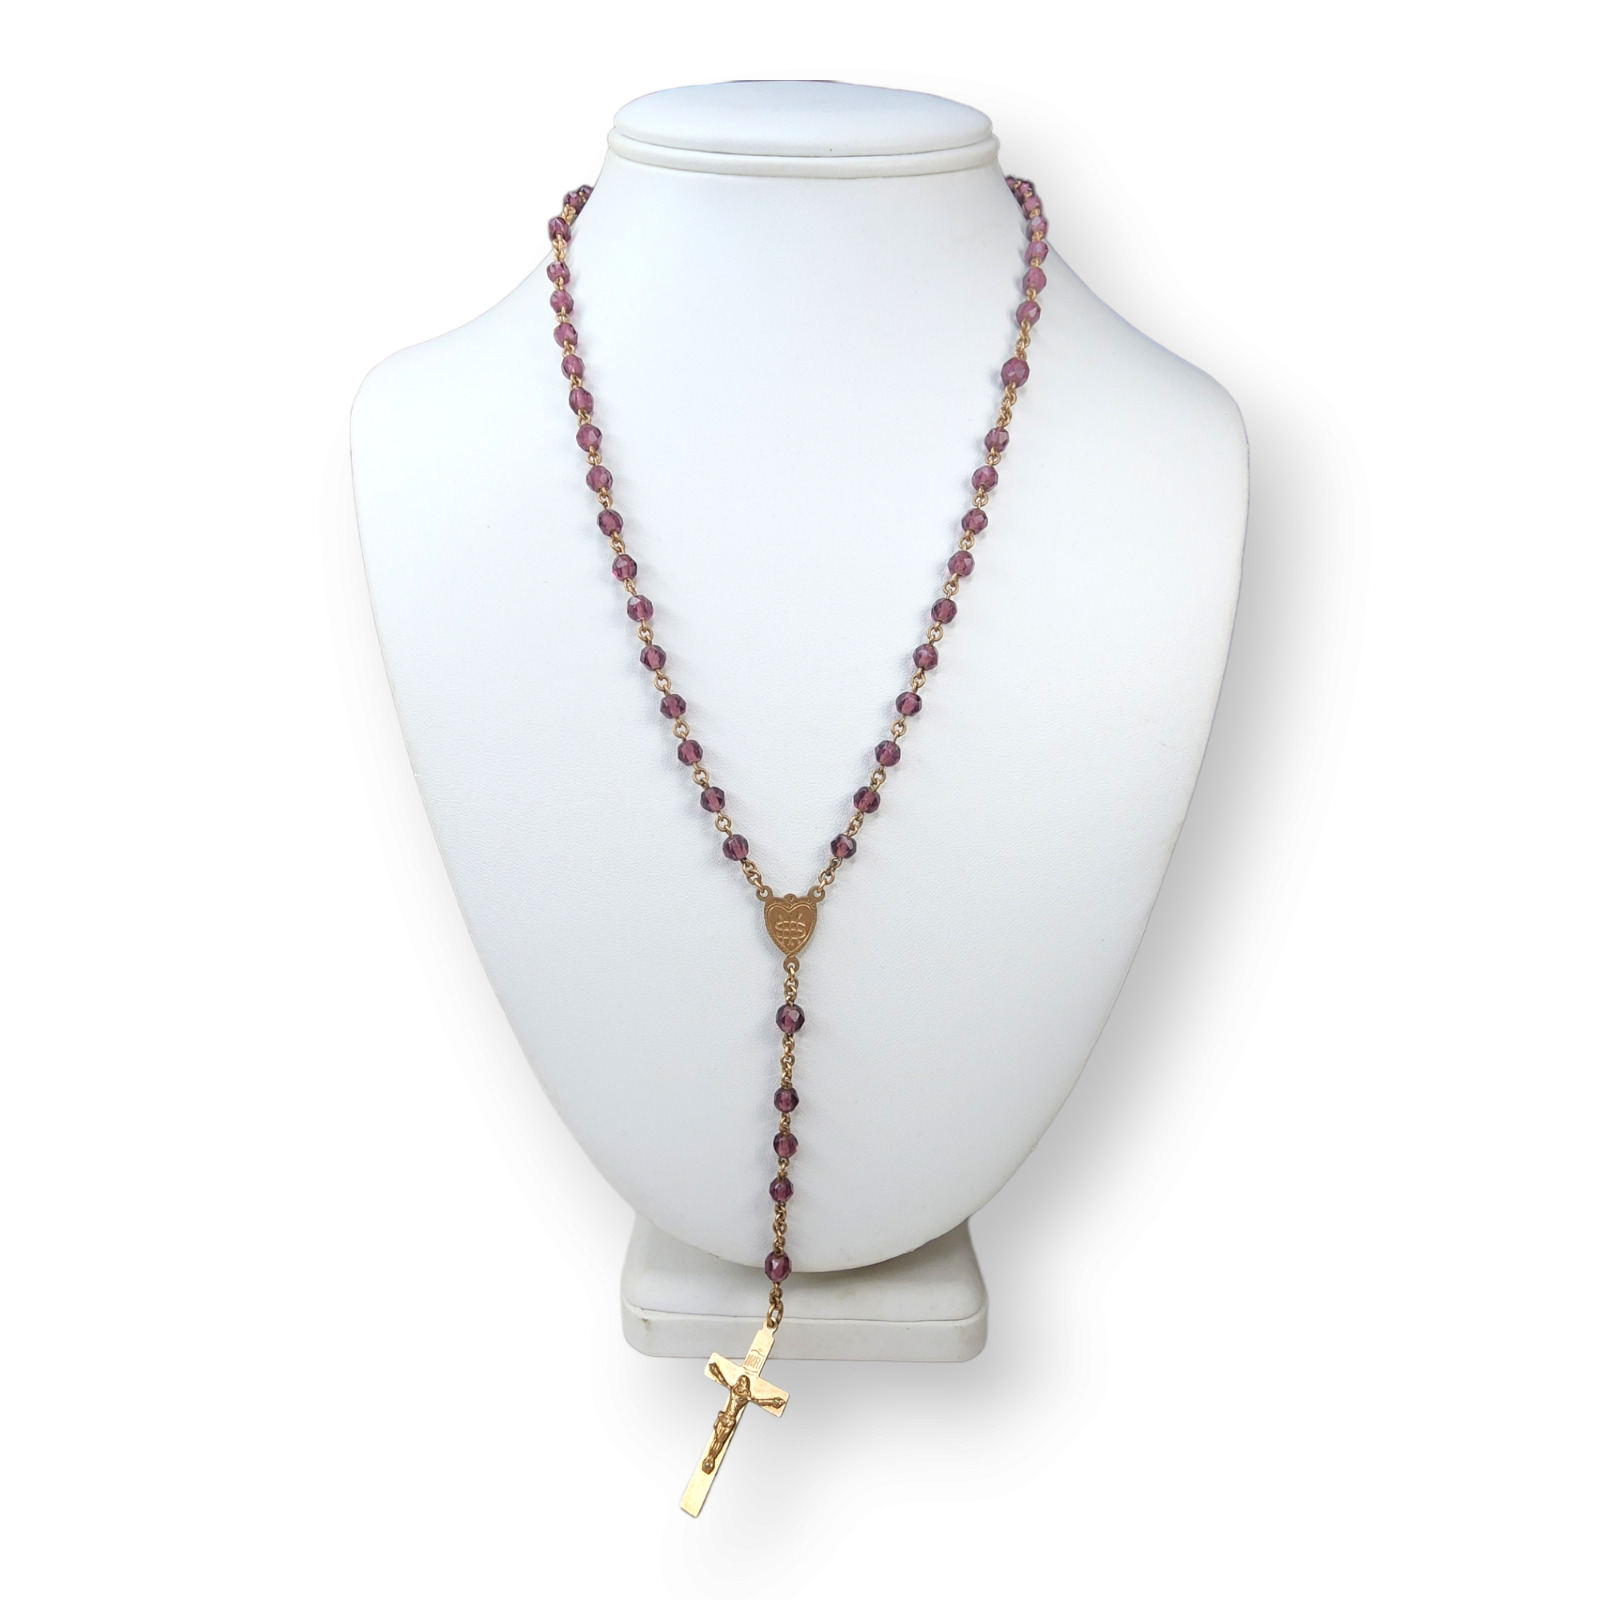 Beautiful Purple Faceted Bead and Copper Rosary Necklace